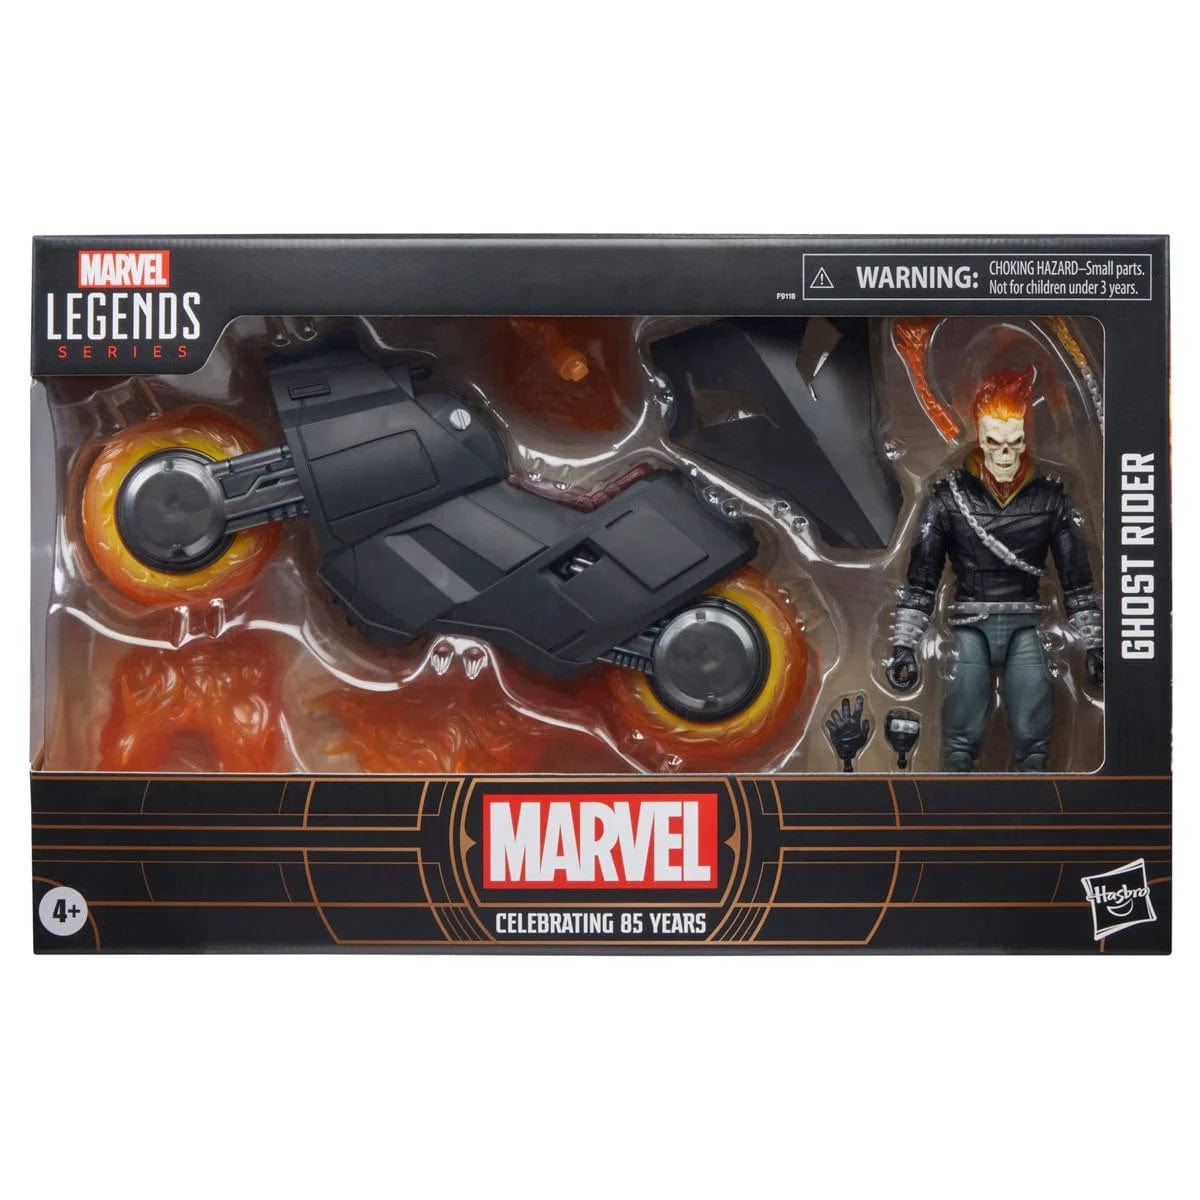 Marvel-Legends-Series-Ghost-Rider-_Danny-Ketch_-with-Motorcycle-Action-Figure-Front-Box-Art